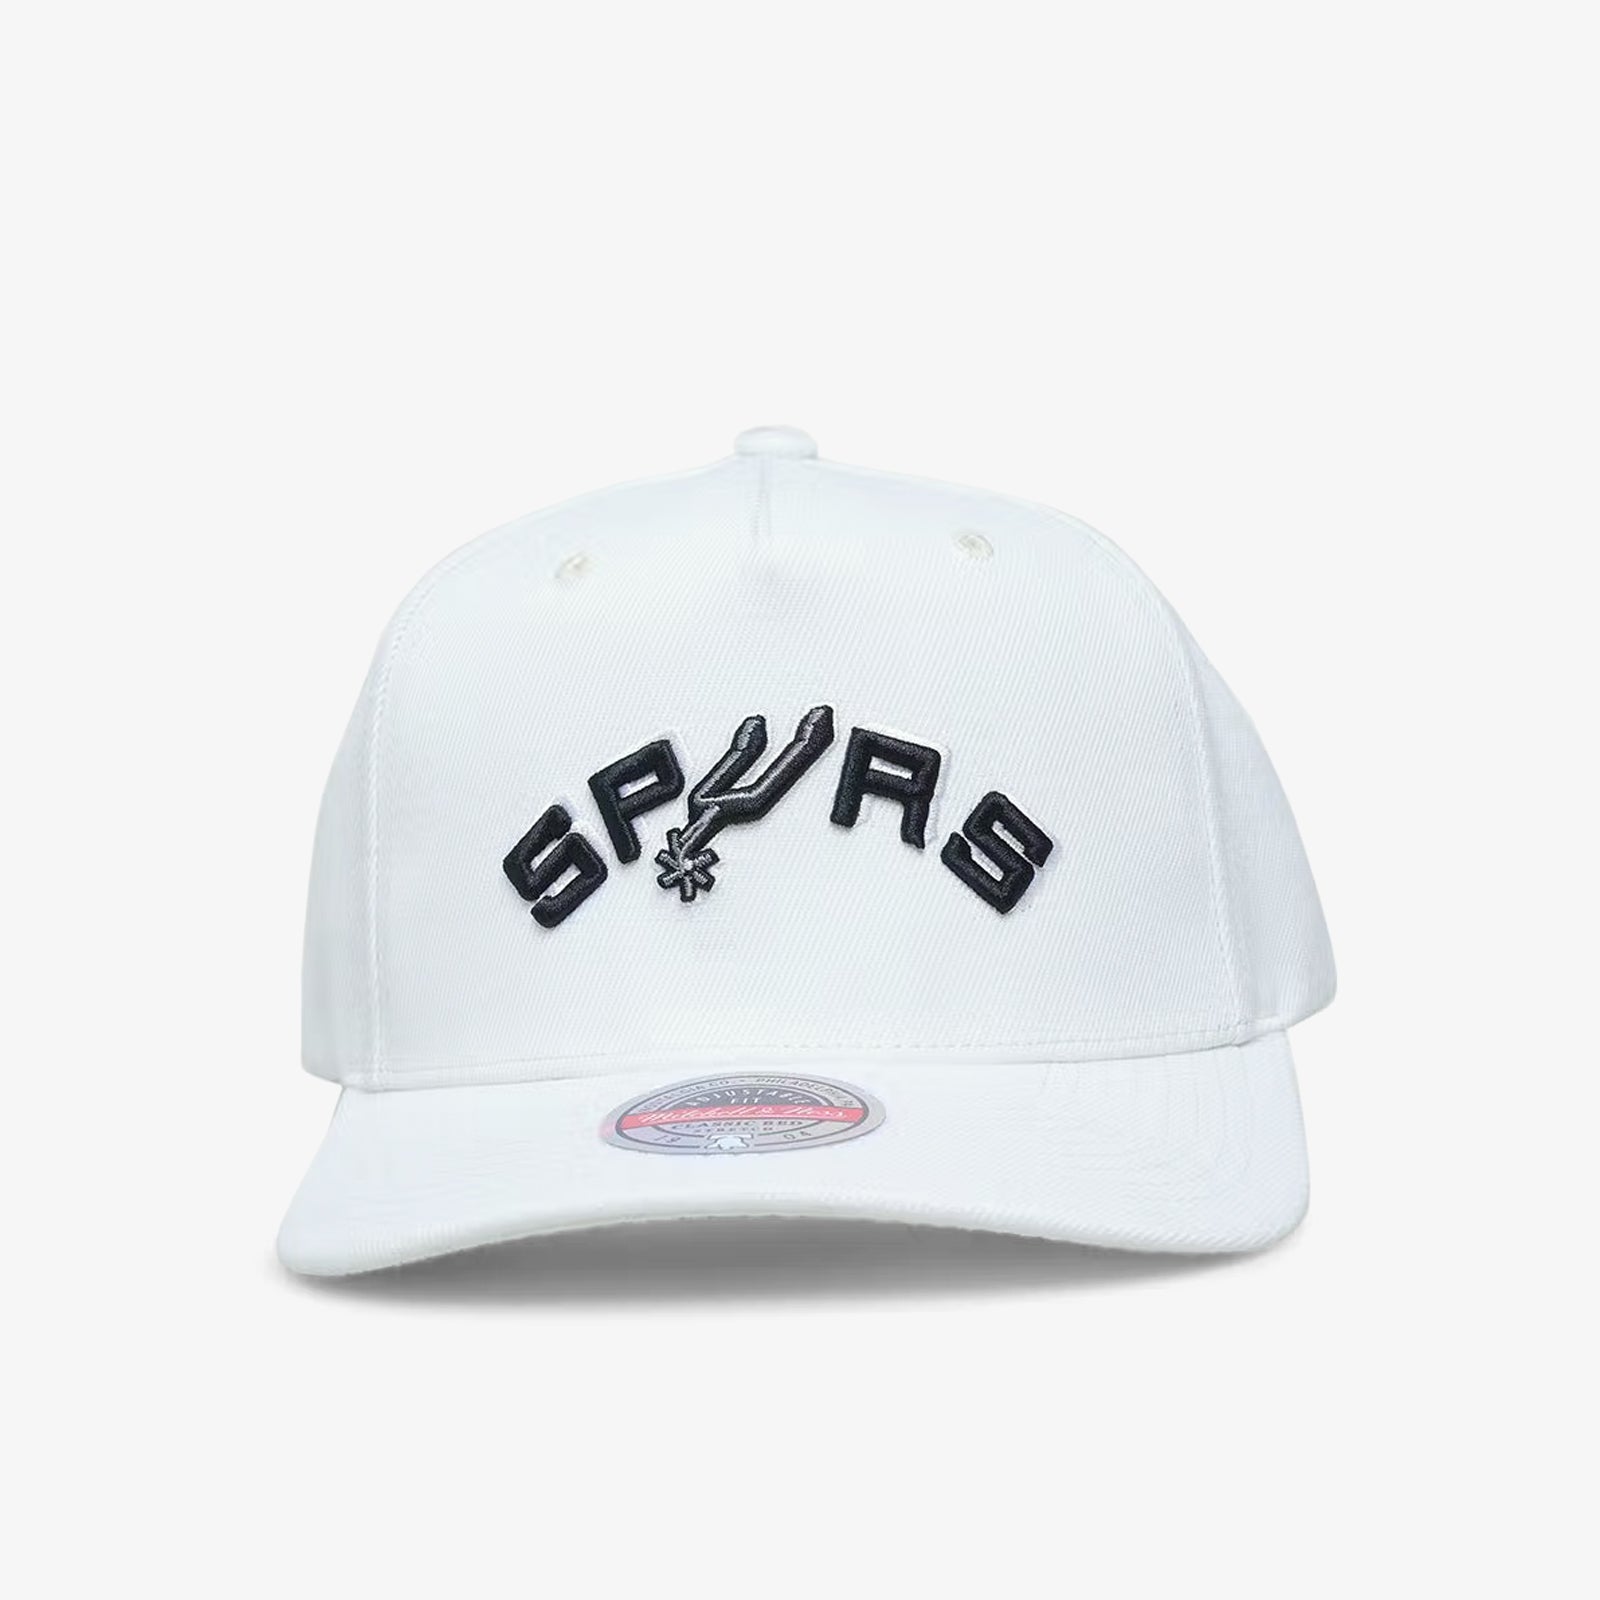 Mitchell & Ness San Antonio Spurs All in Pro White Snapback Hat